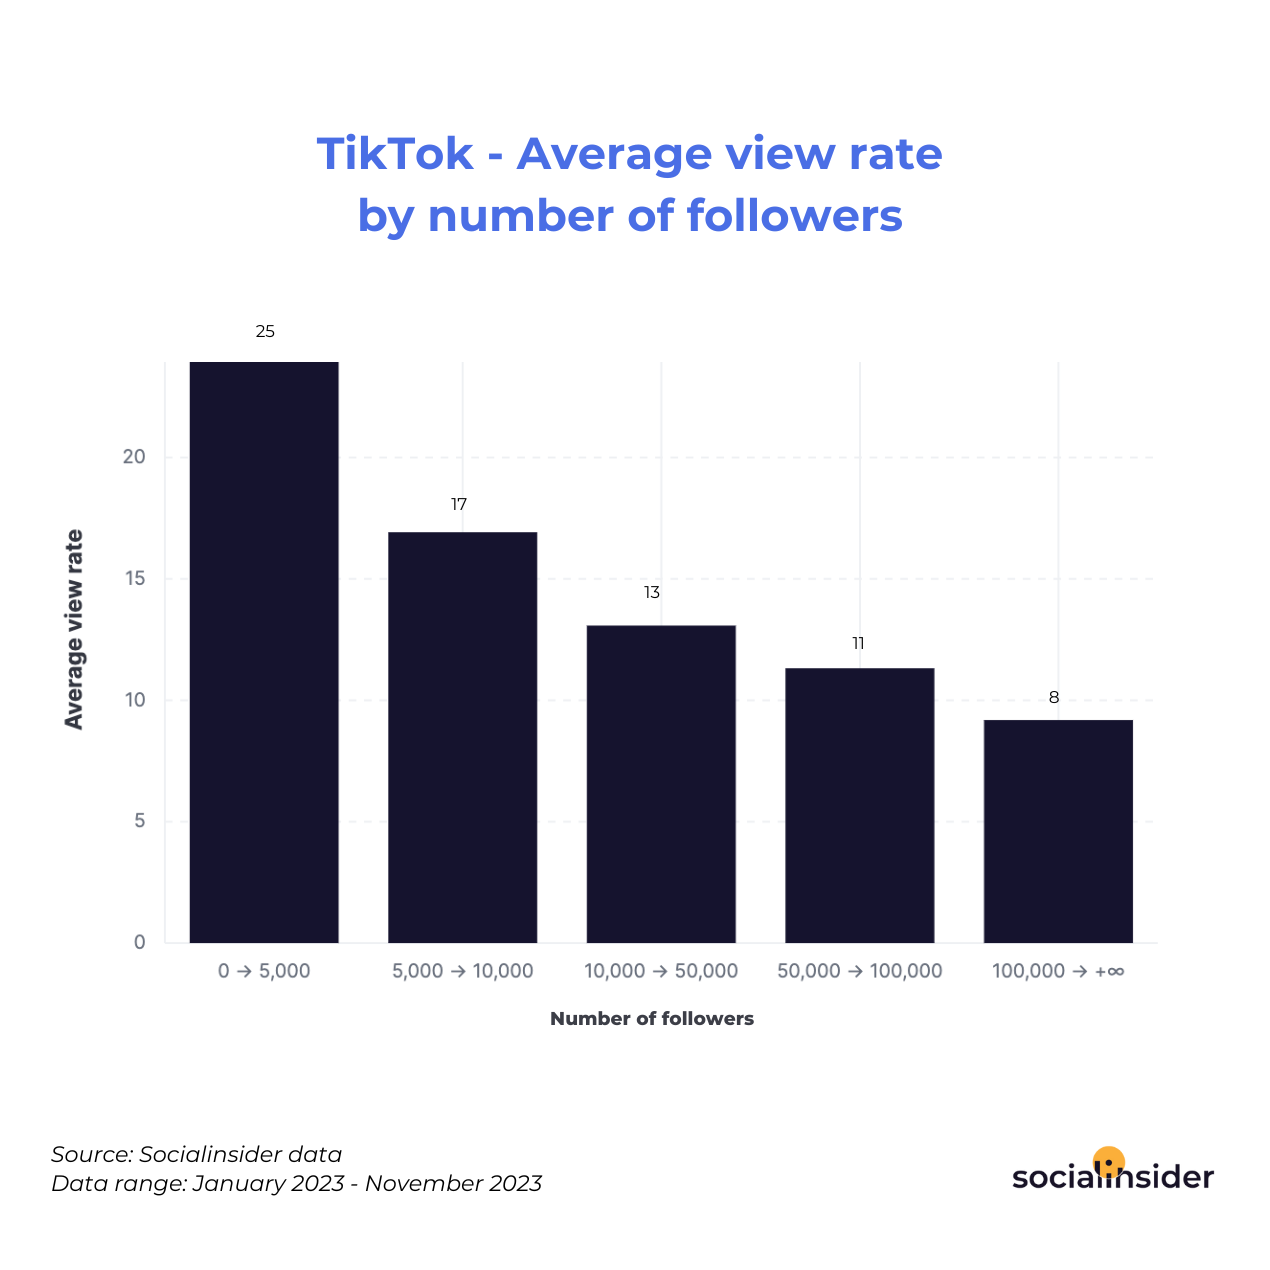 TikTok - Average view rate by number of followers